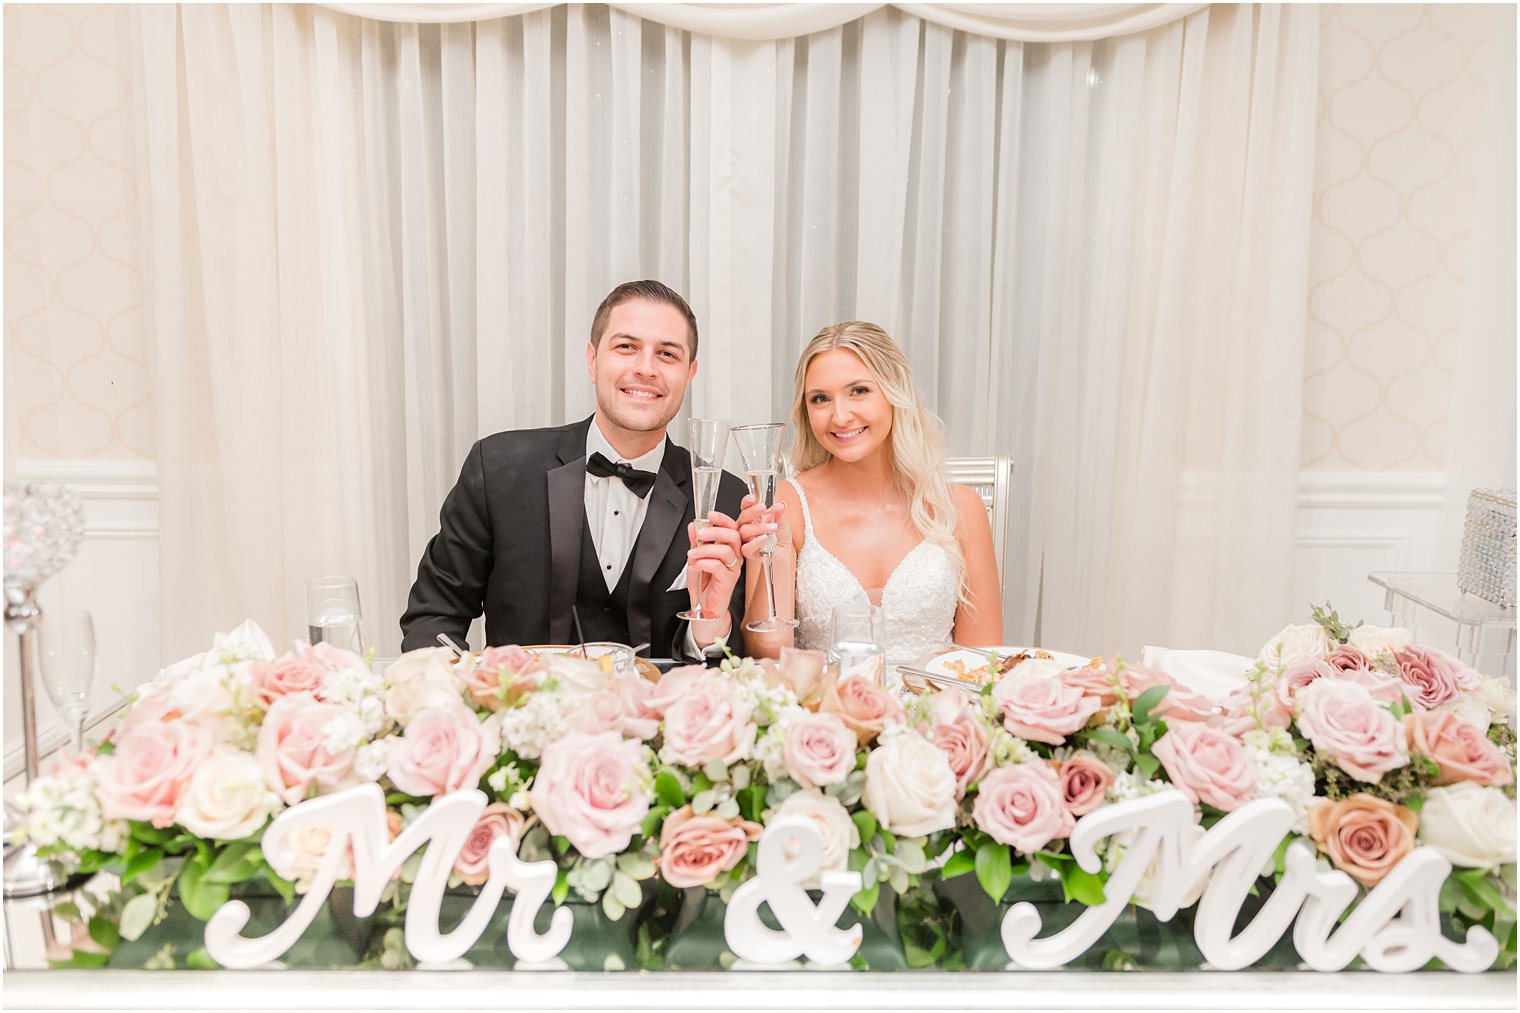 newlyweds toast champagne glasses at sweetheart table behind pink and white flowers